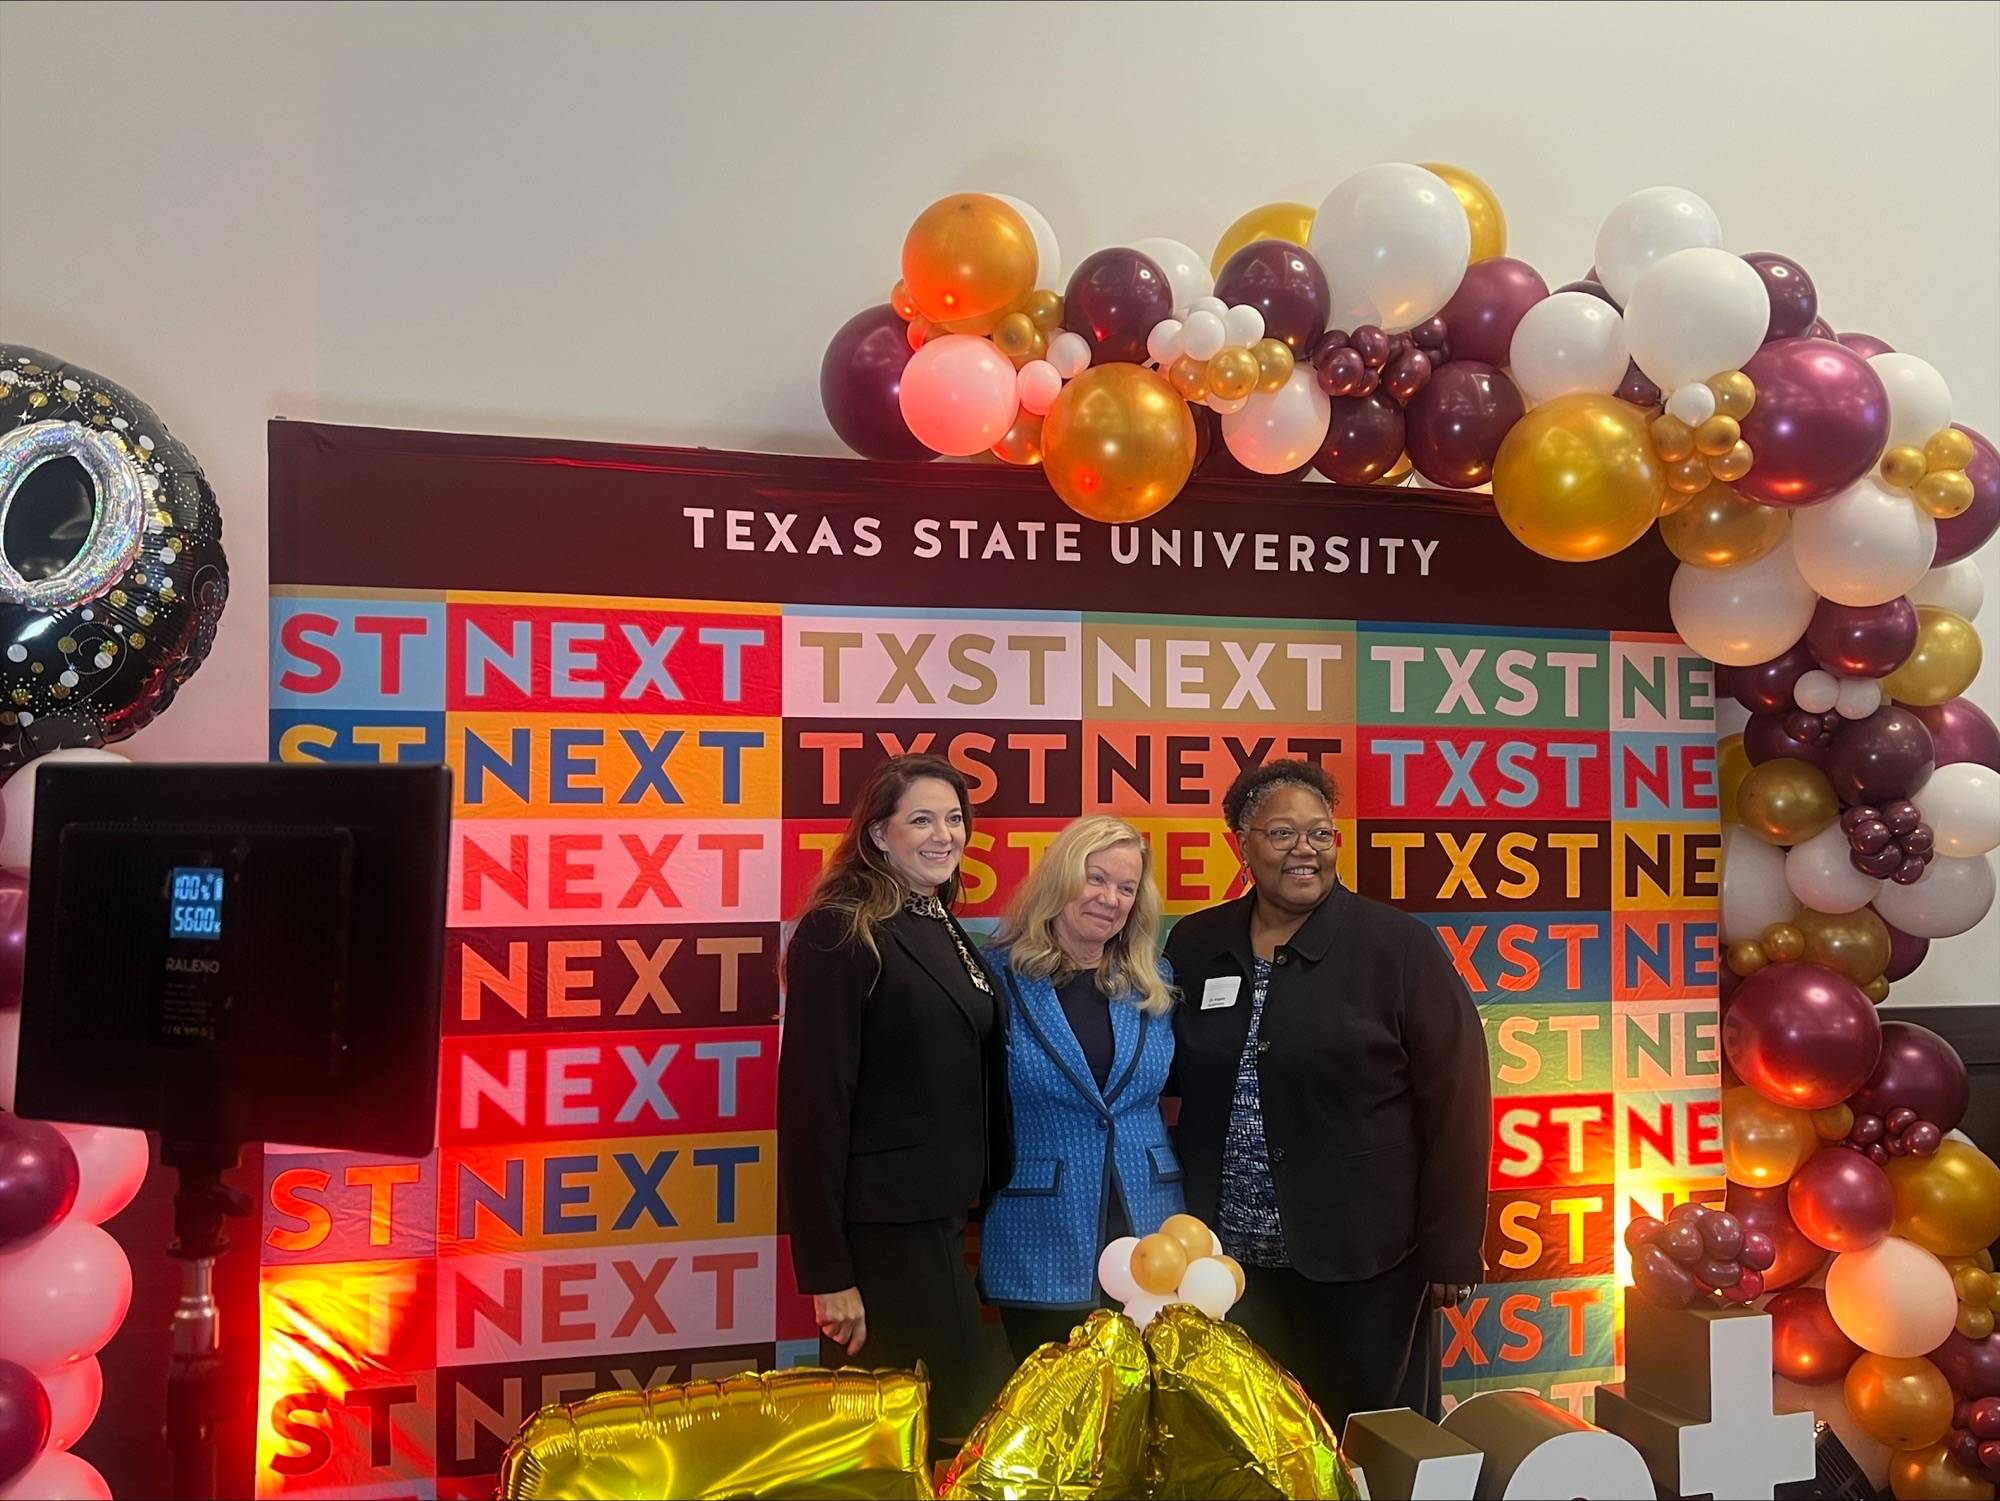 Three people in business clothing pose in front of a colorful backdrop, surrounded by balloons.